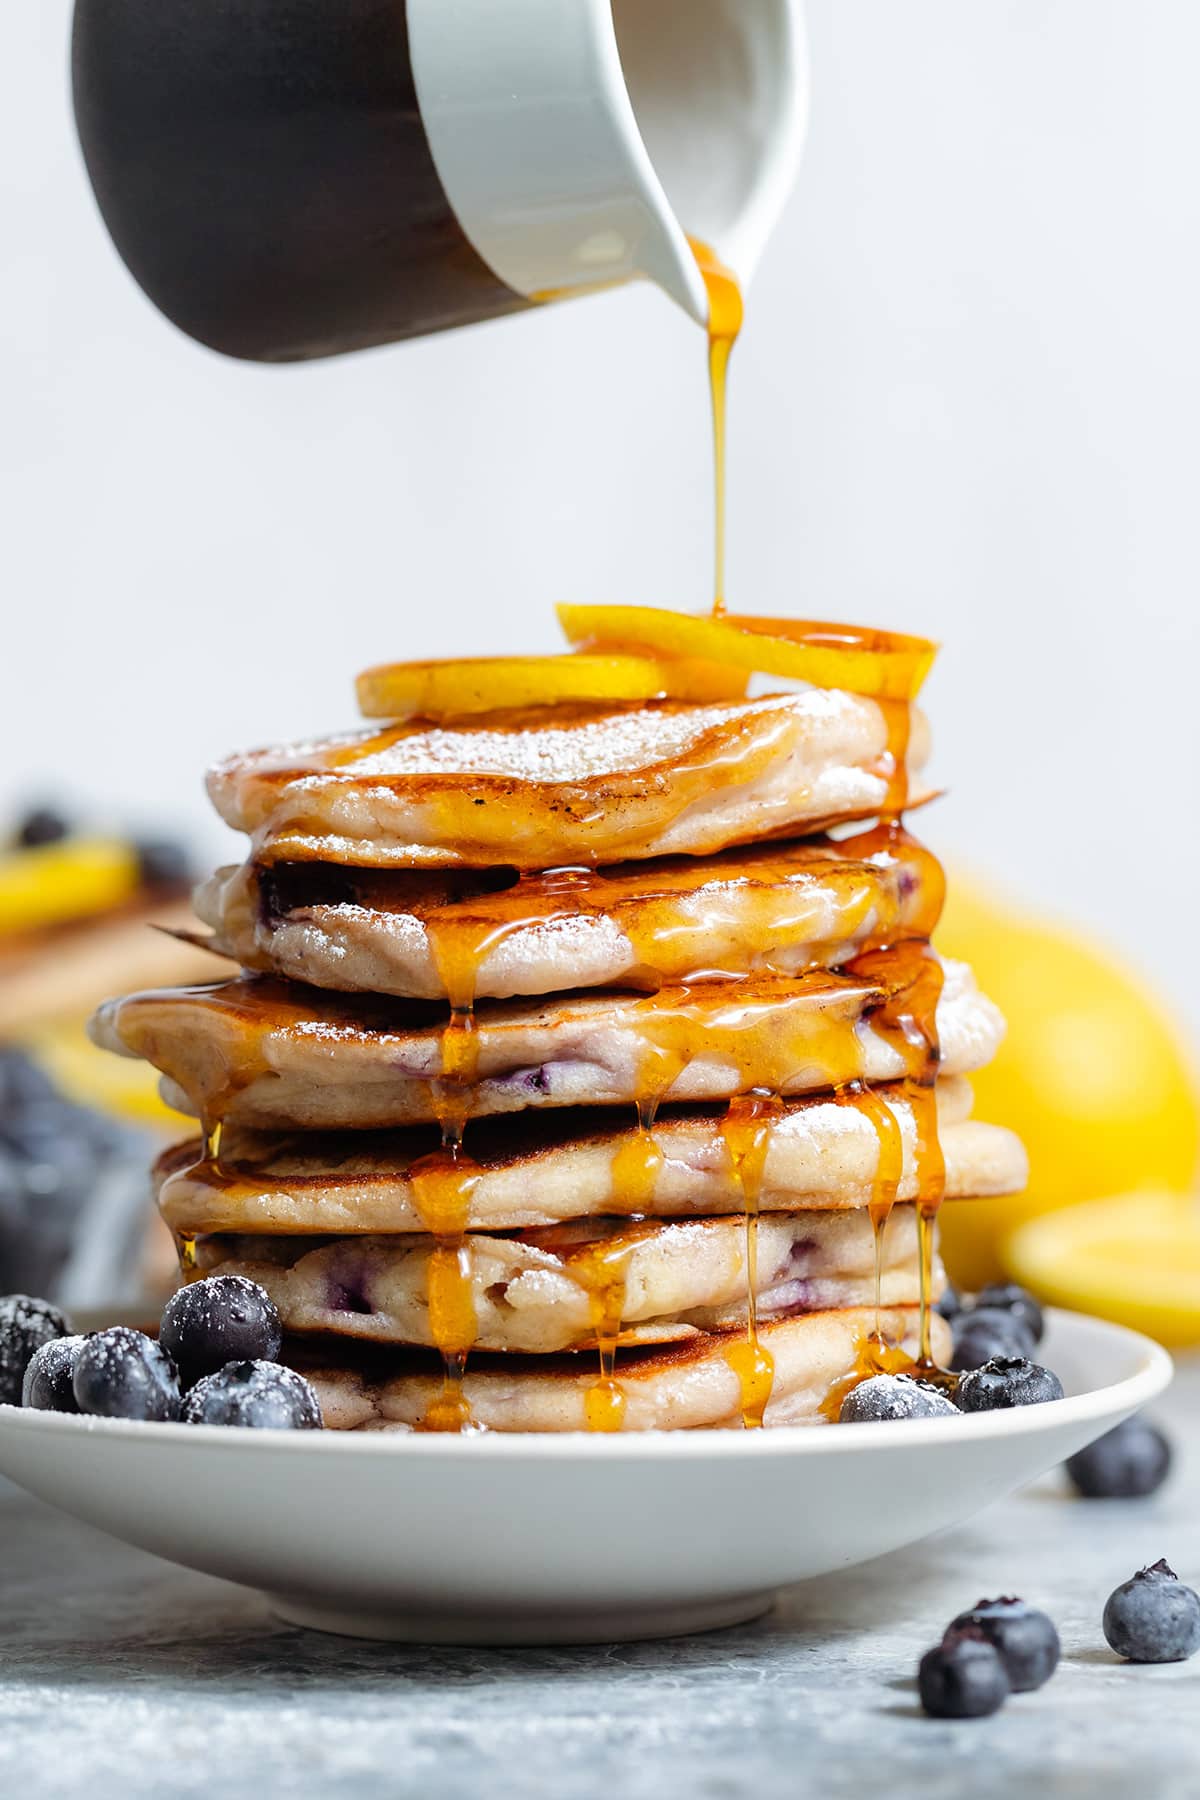 A stack of pancakes garnished with blueberries and lemon slices being drizzled with maple syrup.